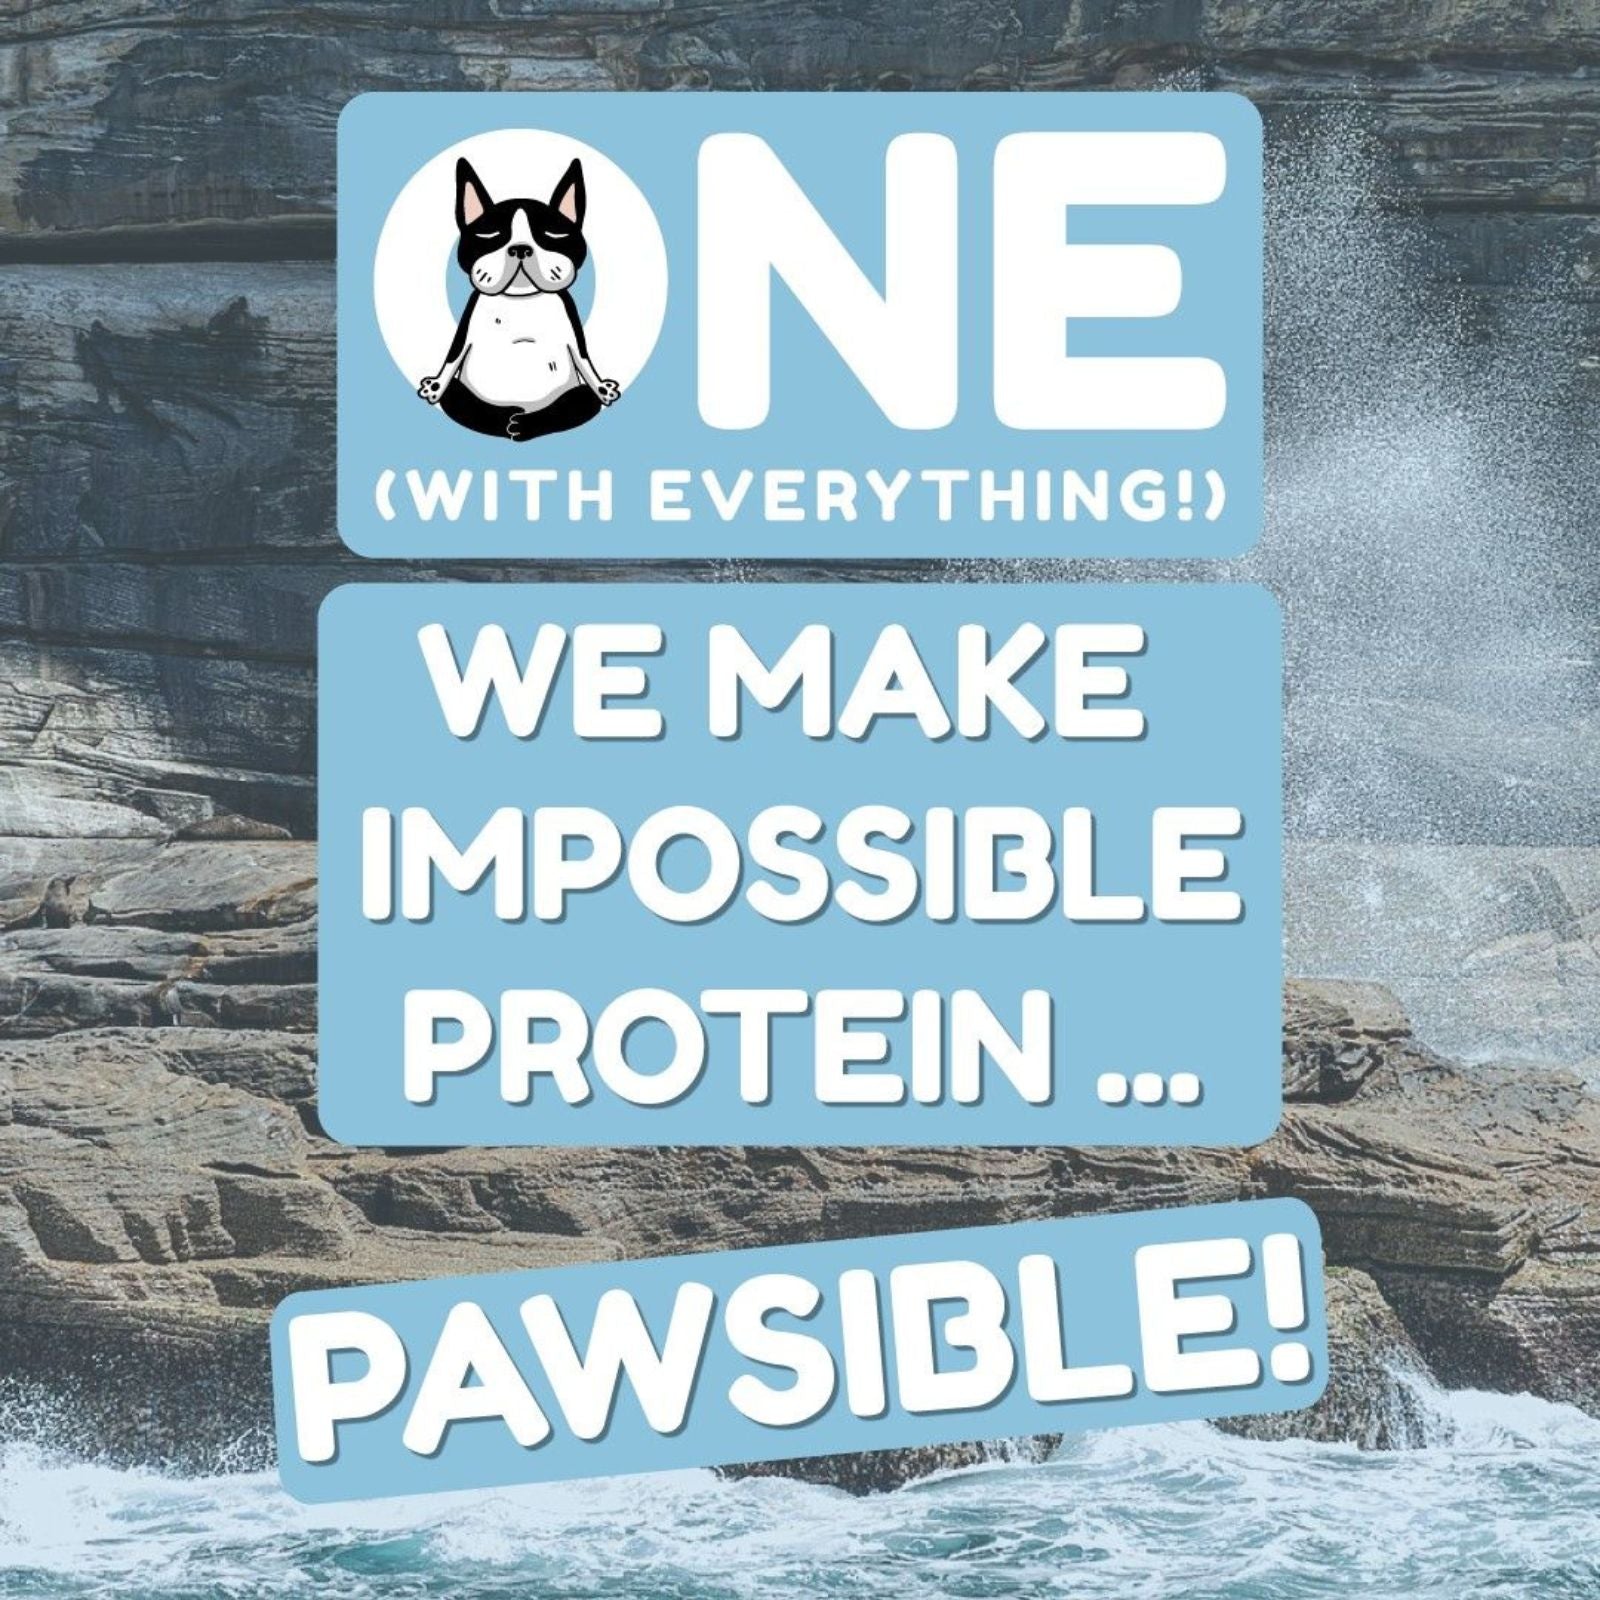 Tile advertisement for One with Everything dog treats with the tagline "We make impossible protein... Pawsible!" The branding for One with Everything is also displayed.